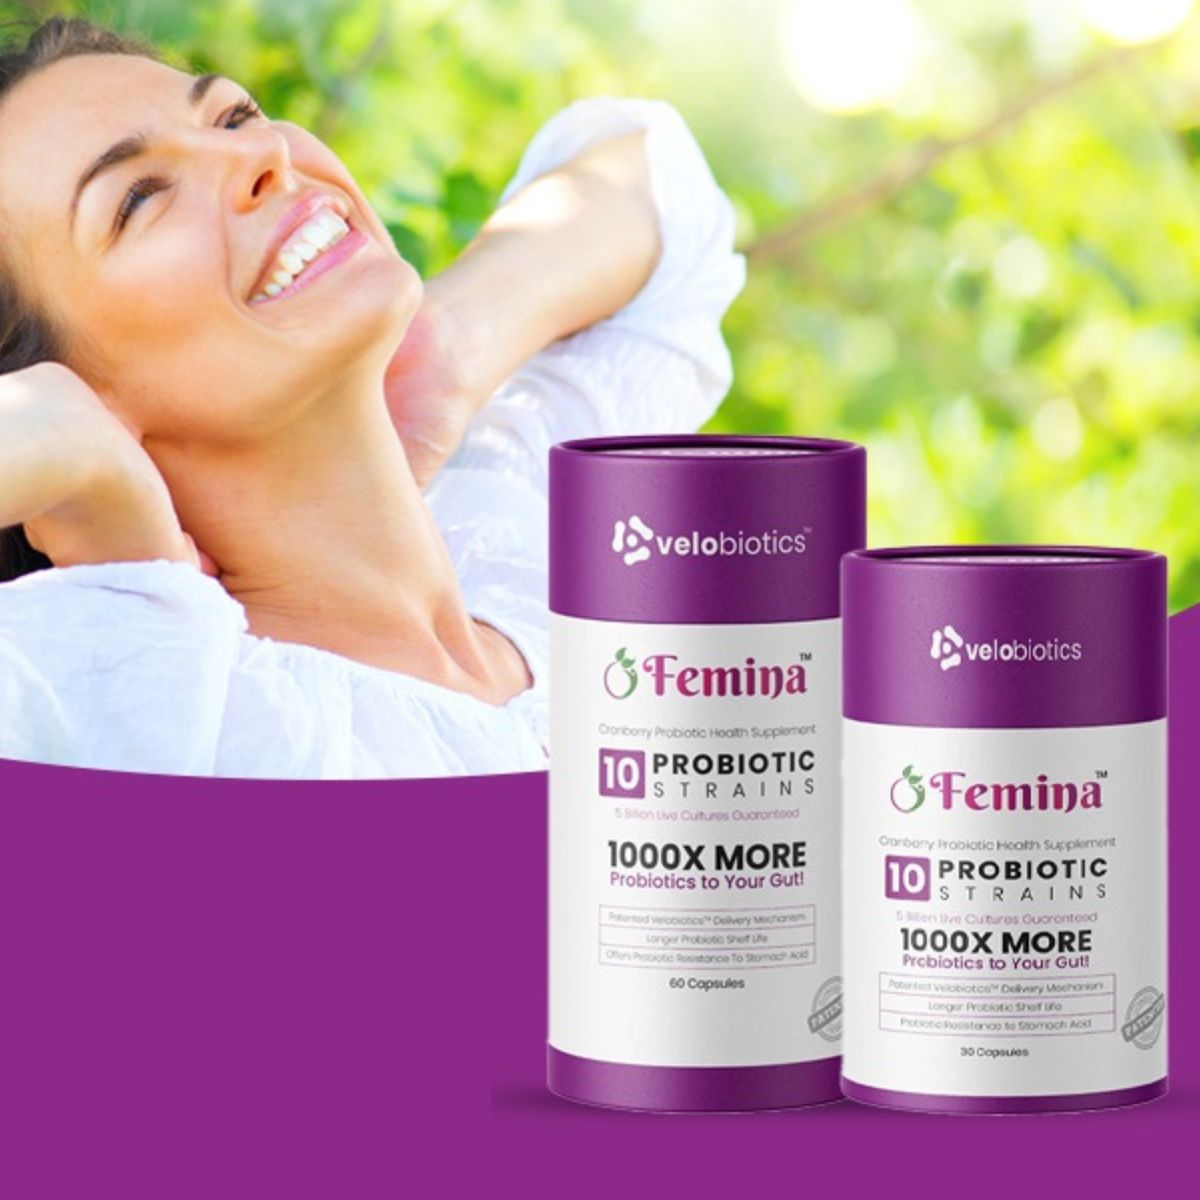 Femina™ Probiotic Capsules with Cranberry Extract for Women